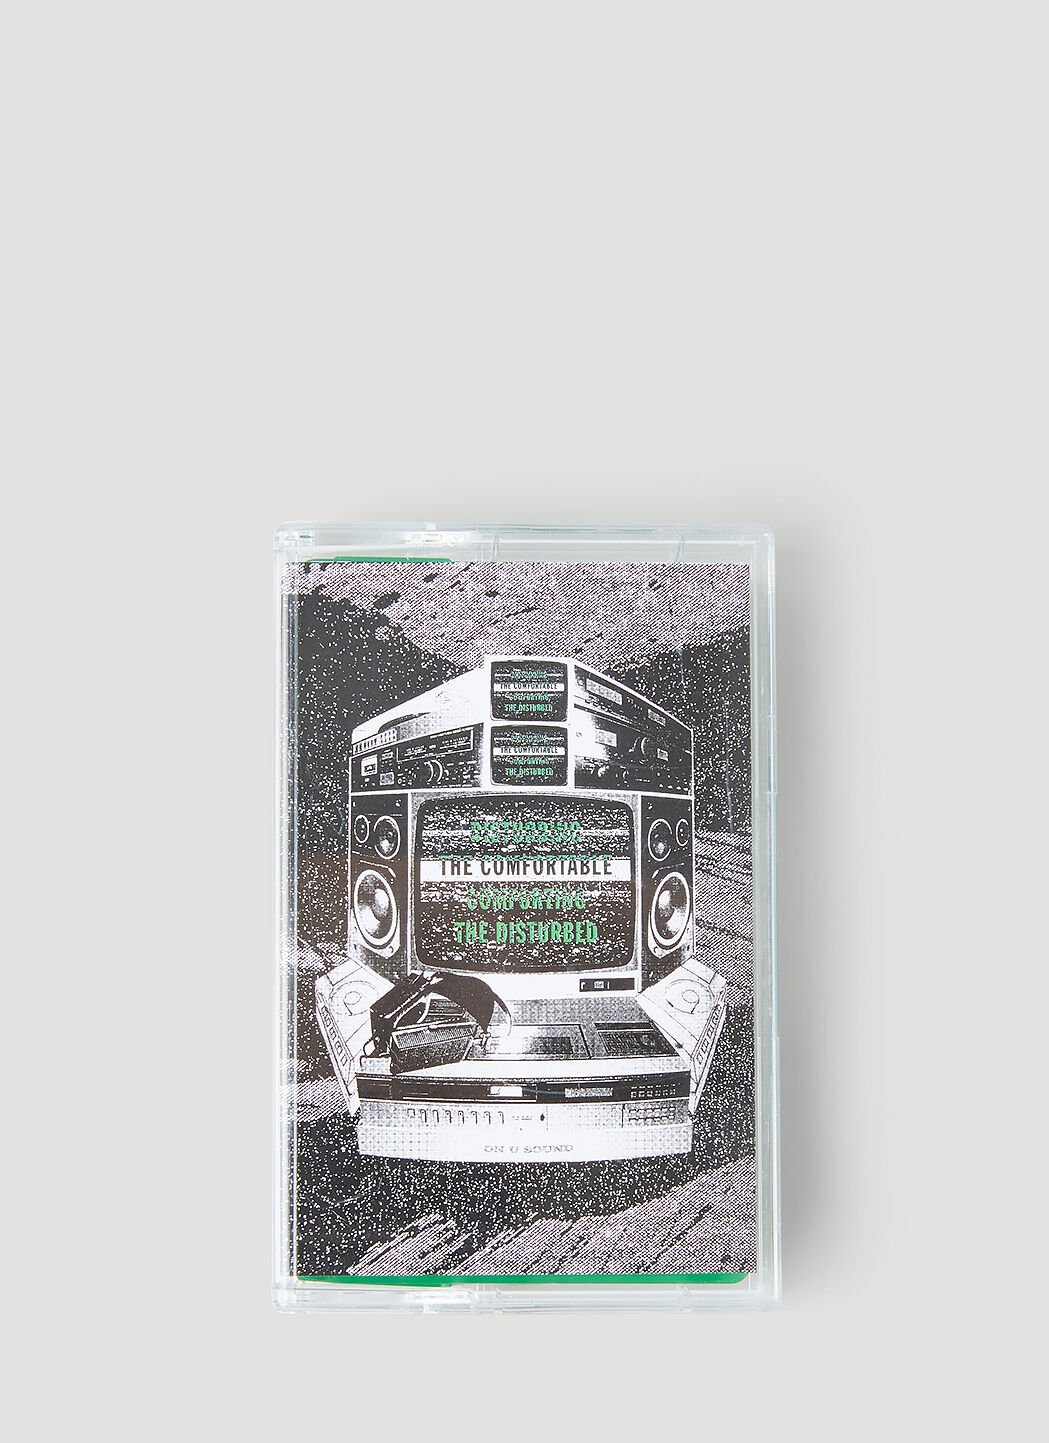 Good Morning Tapes x Relevant Parties On-U Sound Mixtape White gmt0338009